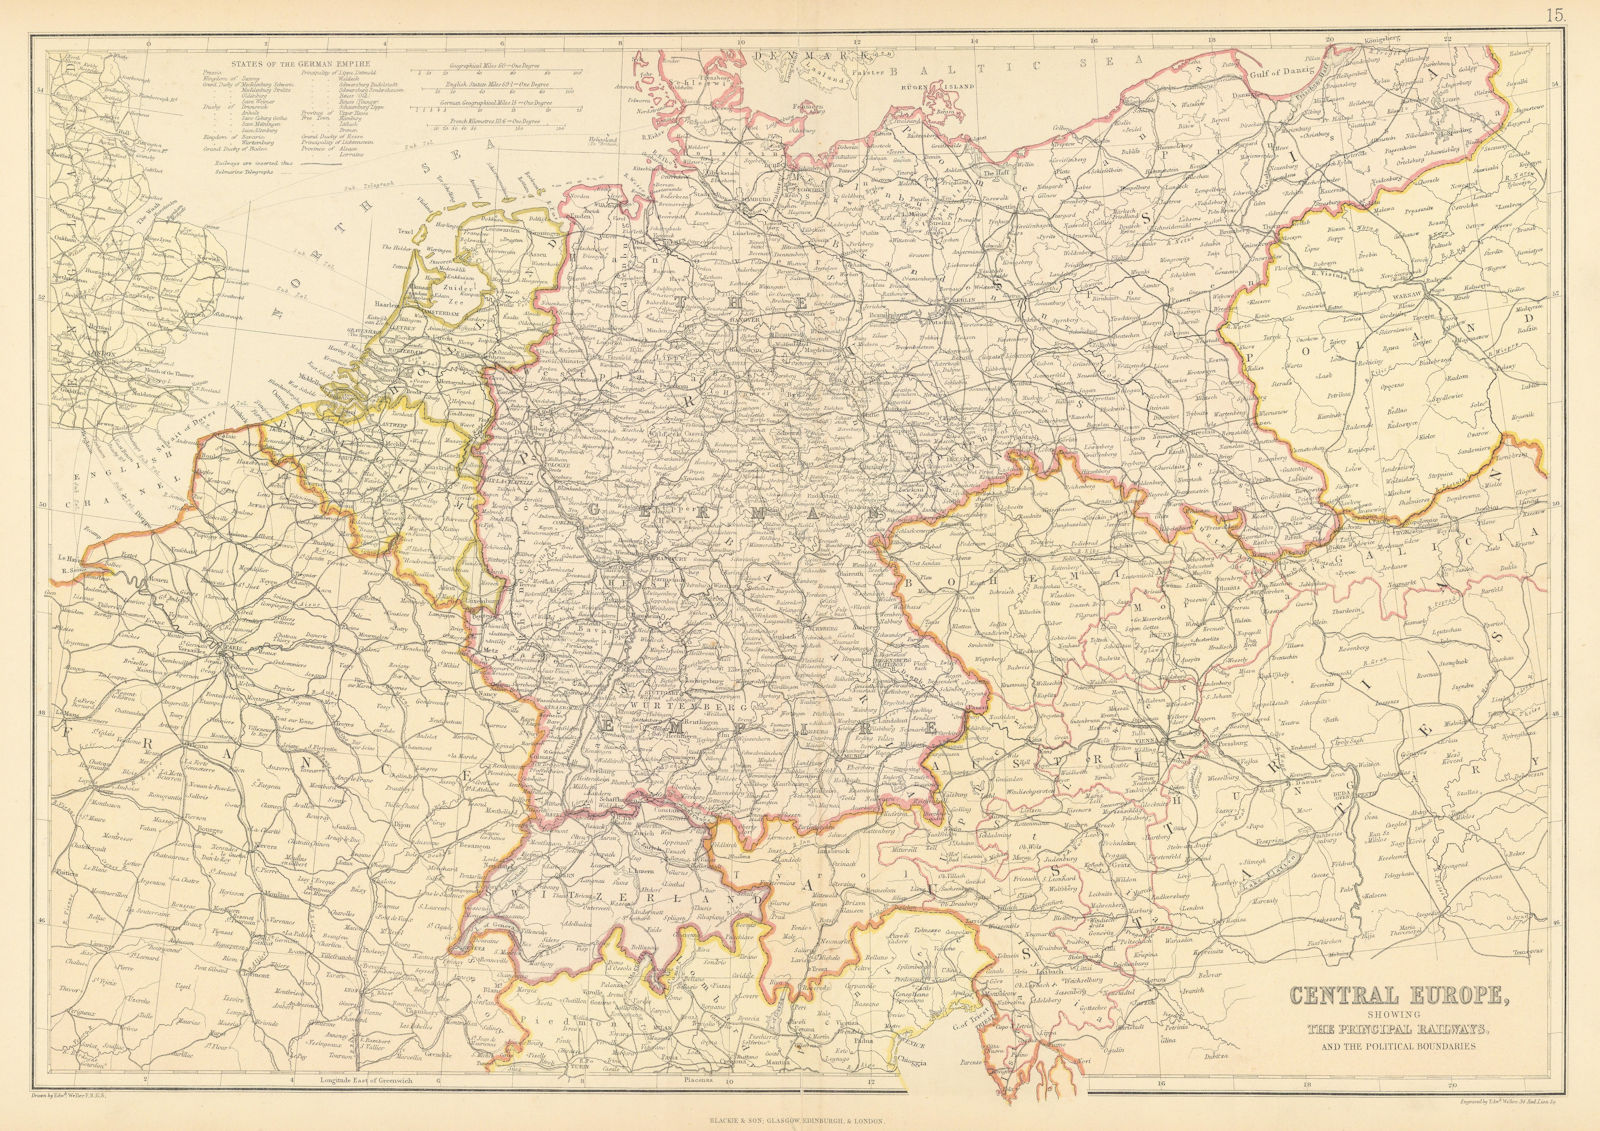 CENTRAL EUROPE. Railways. Scale in German & English miles & km. BLACKIE 1886 map